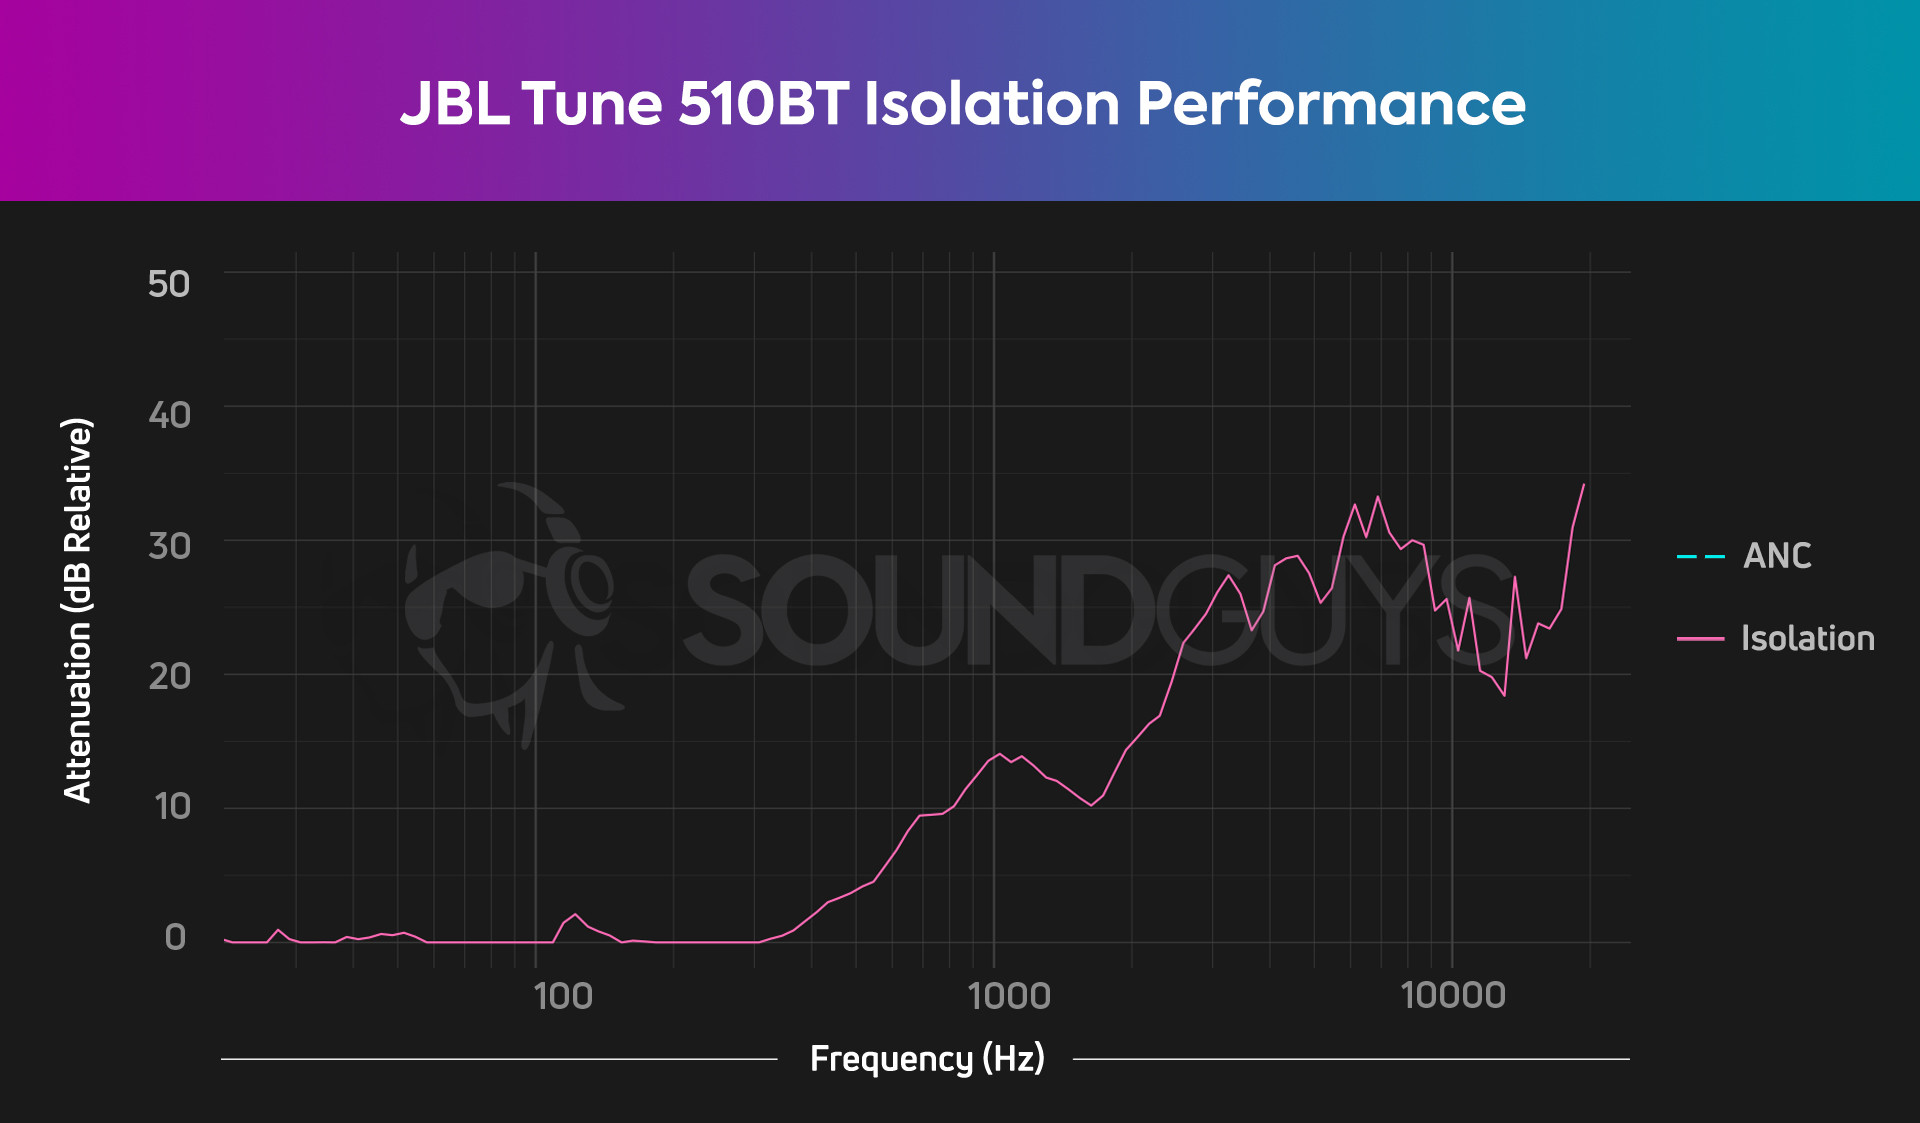 The isolation chart for the JBL Tune 510BT.